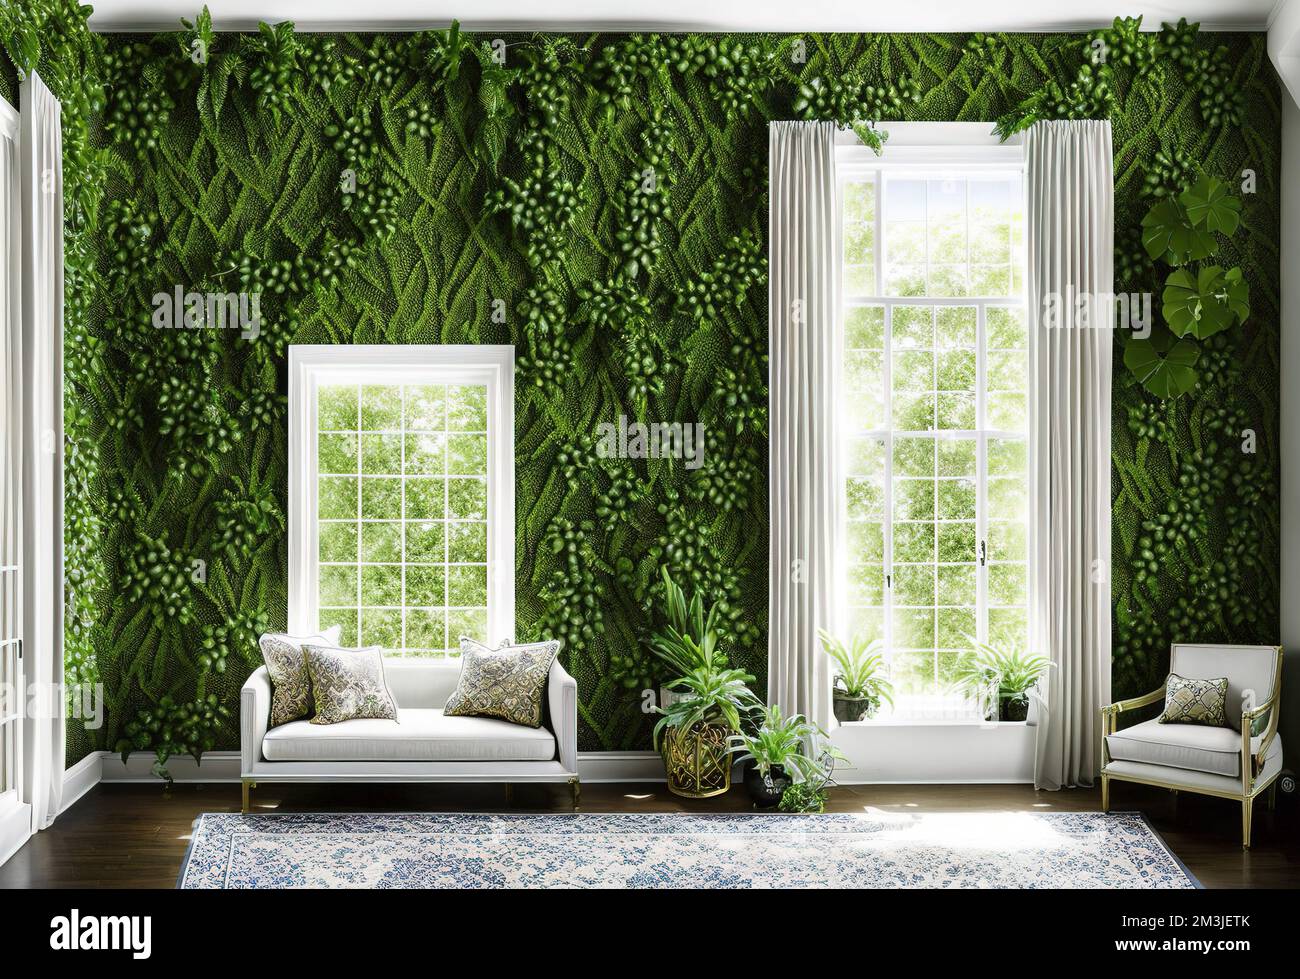 Living room interior with windows and walls of green plants Stock Photo